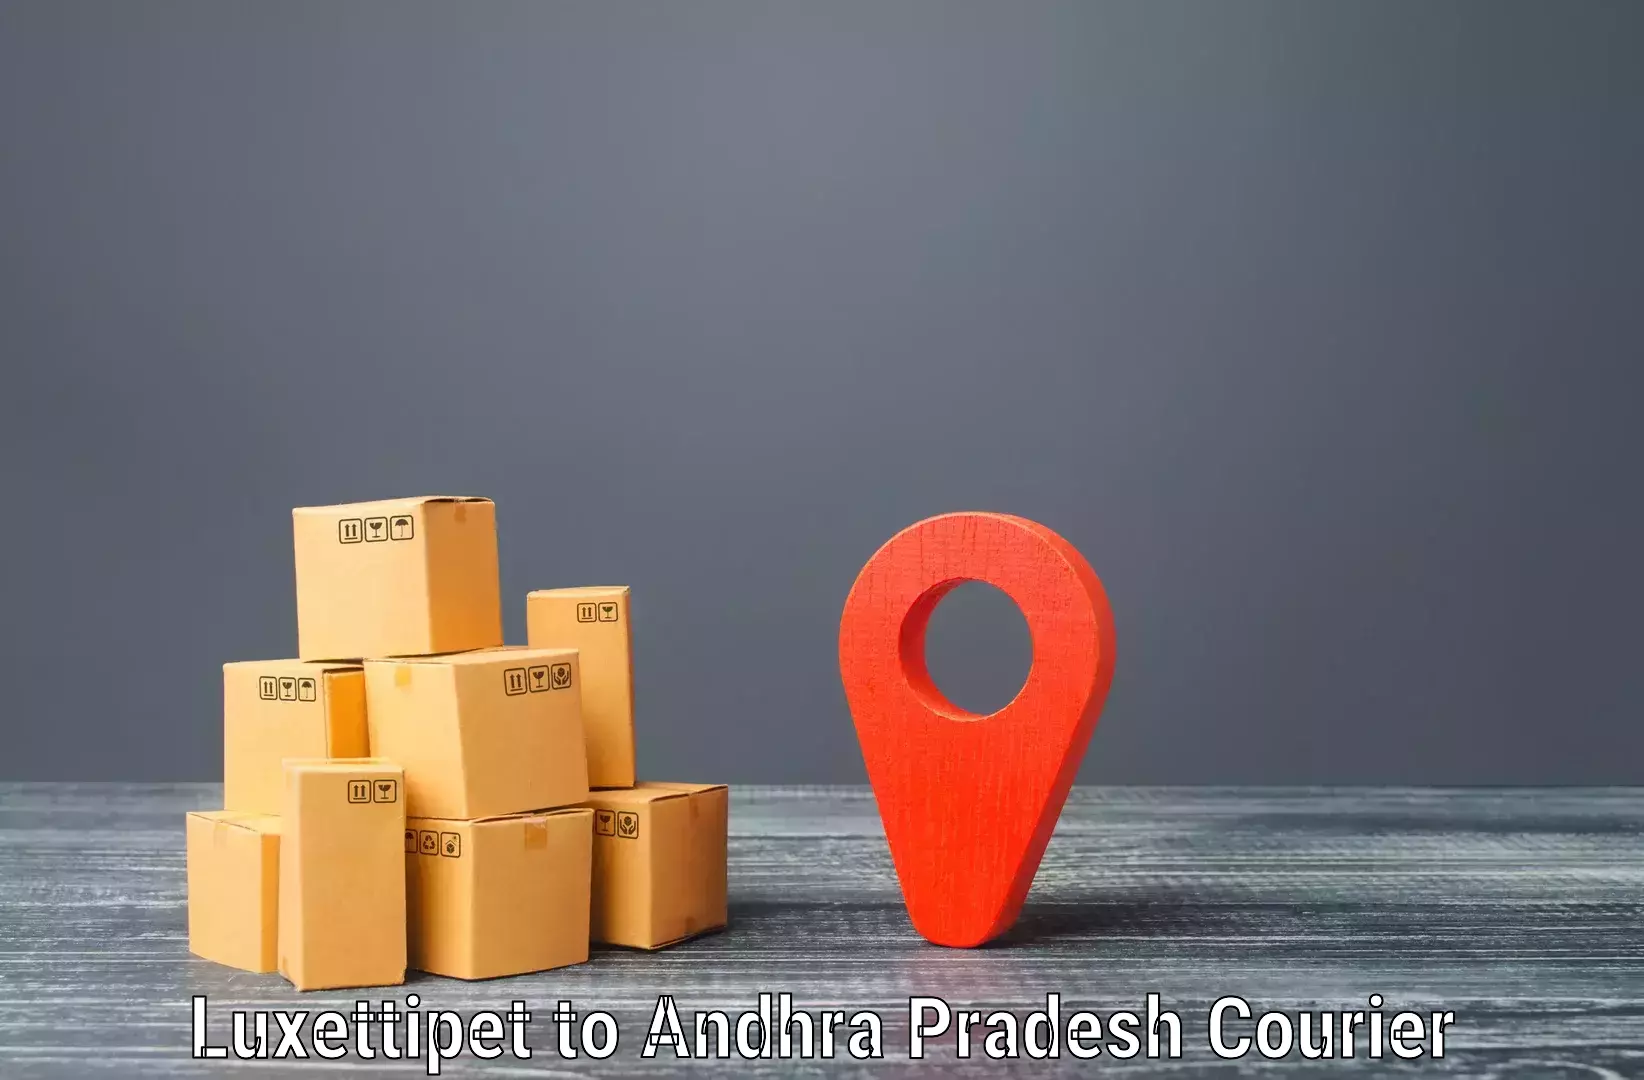 Weekend courier service in Luxettipet to Rajayyapeta